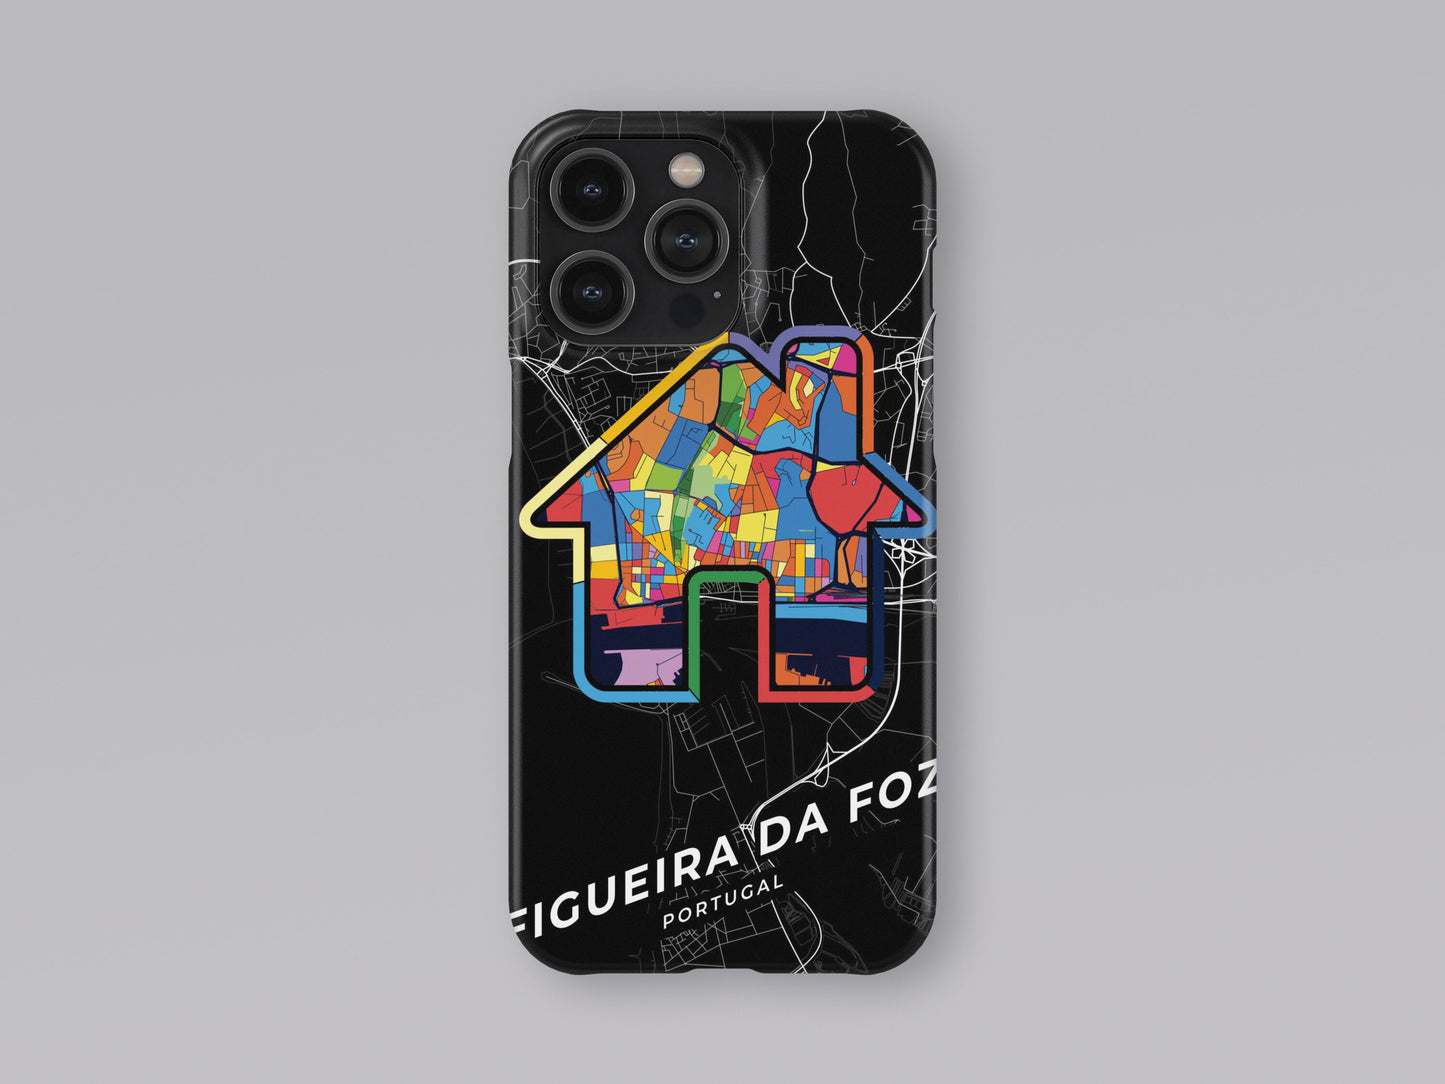 Figueira Da Foz Portugal slim phone case with colorful icon. Birthday, wedding or housewarming gift. Couple match cases. 3